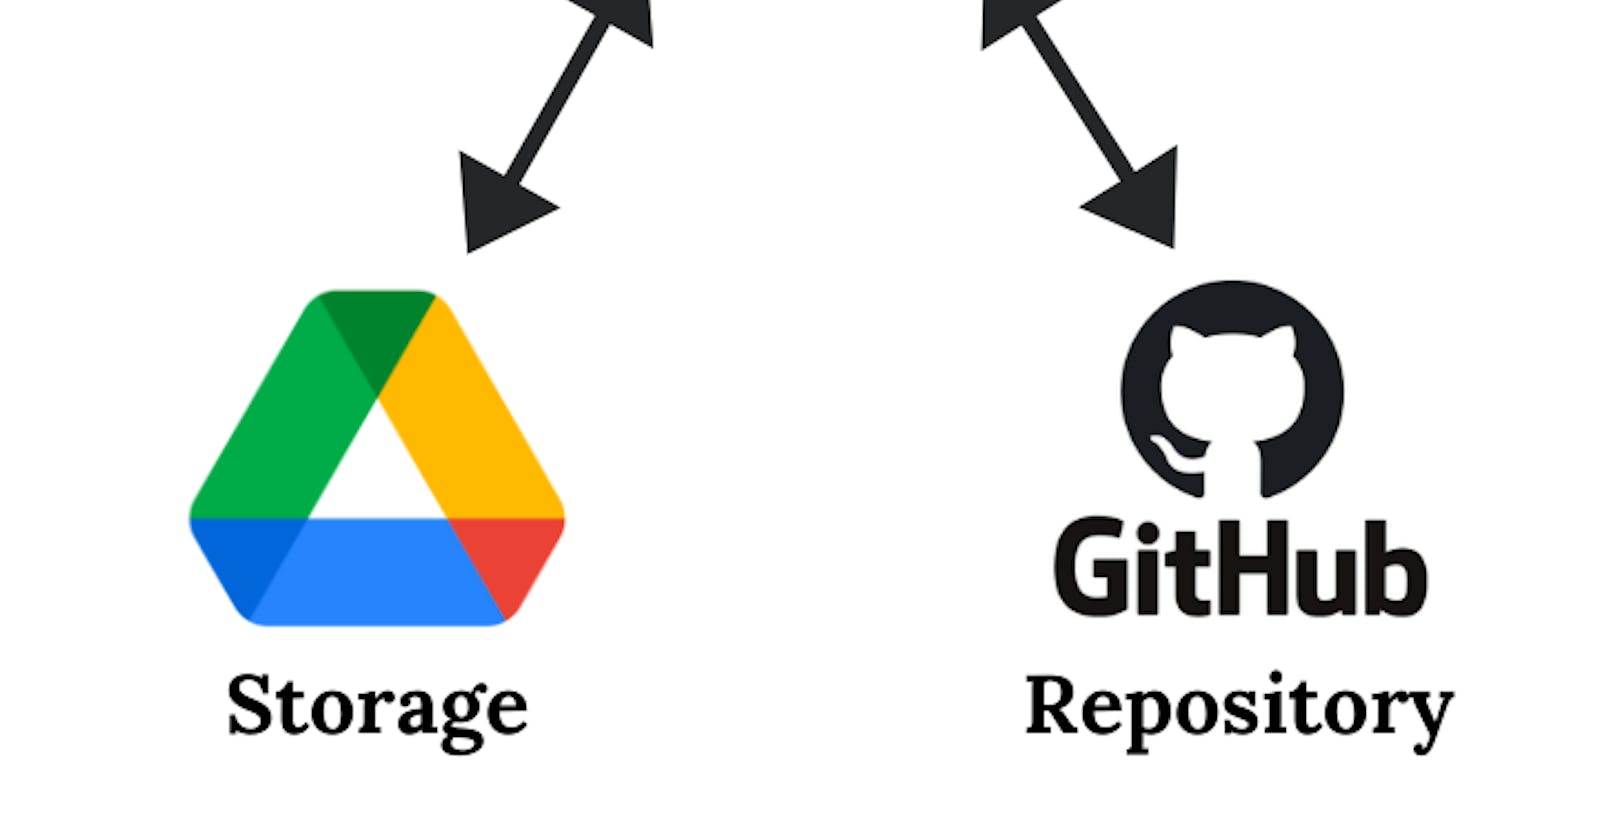 Clone from Git in Colab & upload on Drive